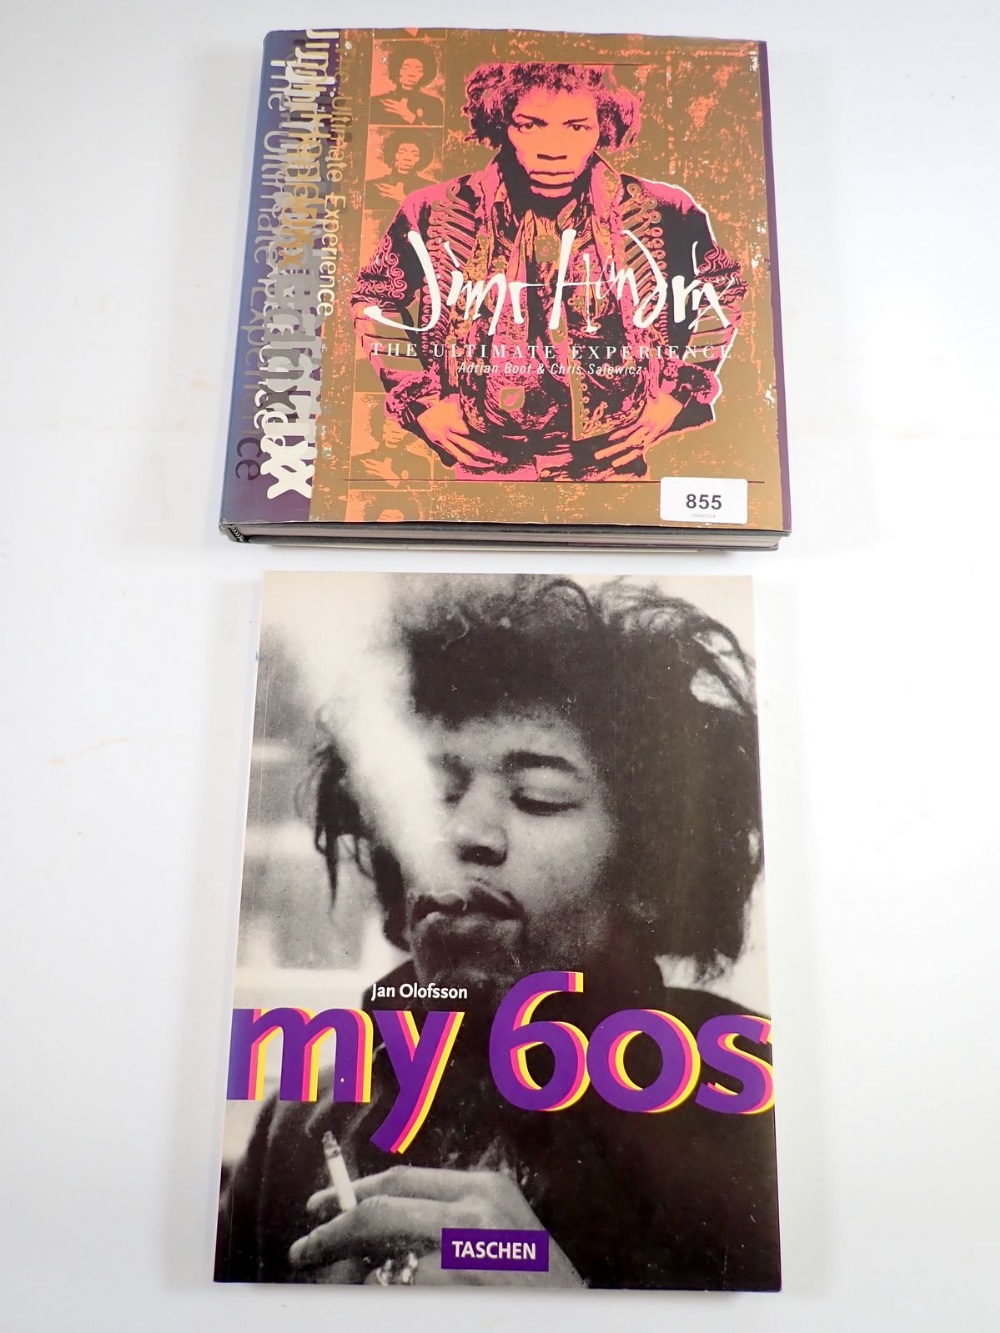 Jimi Hendrix, The Ultimate Experience by Adrain Boot and Christ Salewicz published by Boxtree in